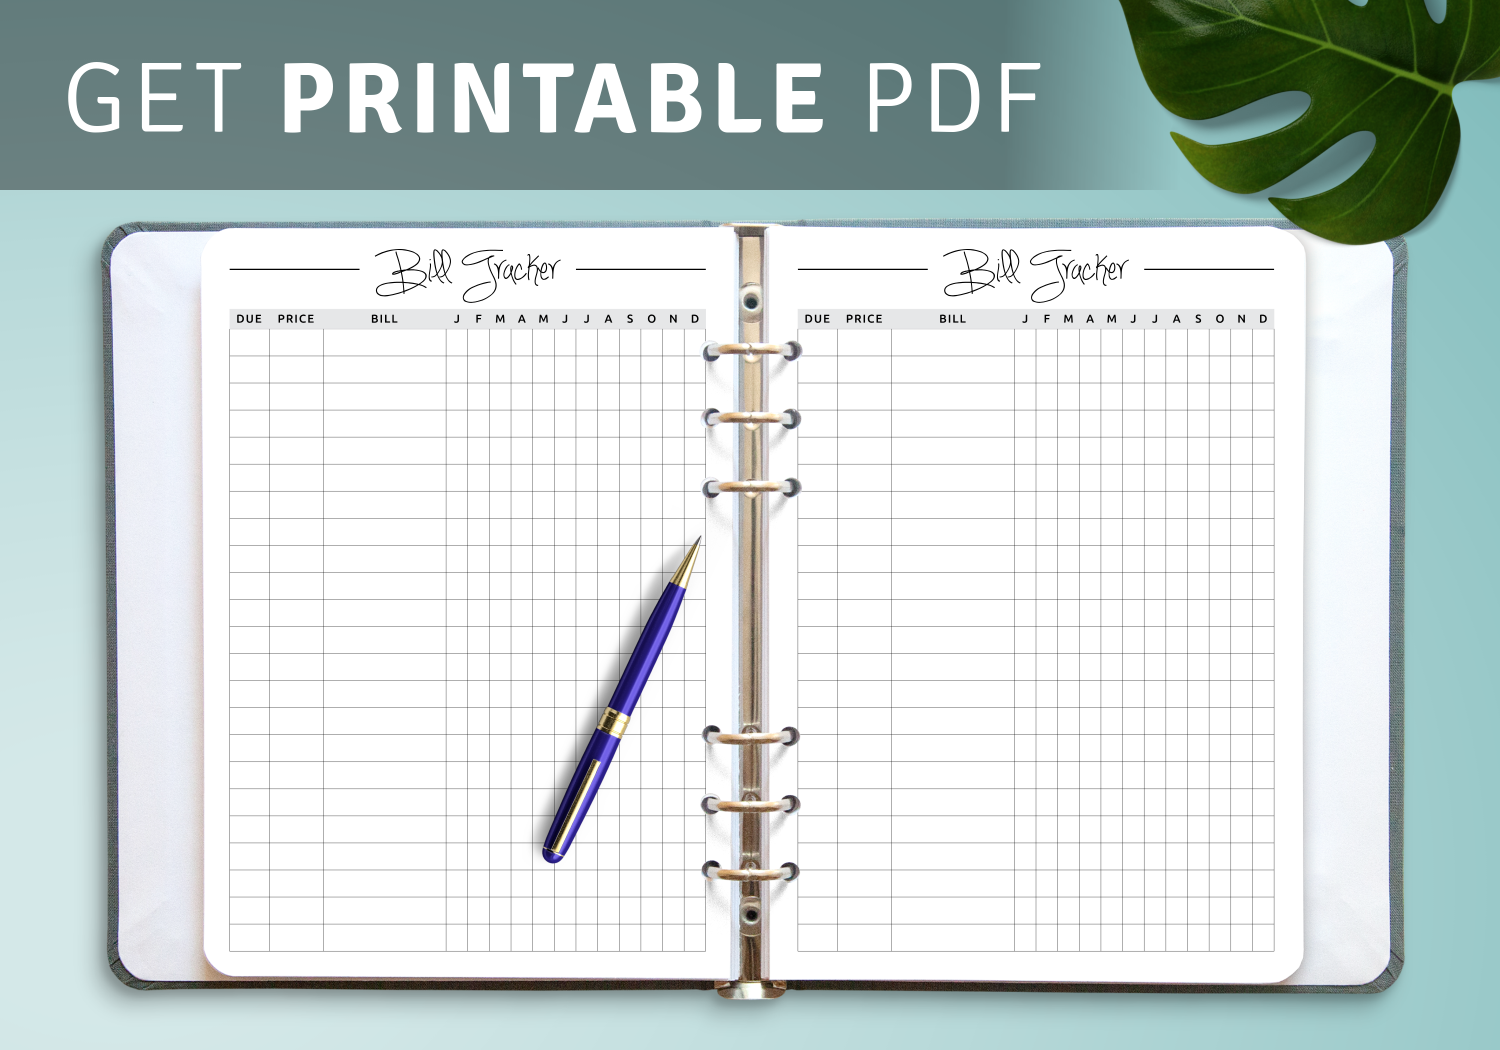 calendars-planners-paper-party-supplies-monthly-bill-tracker